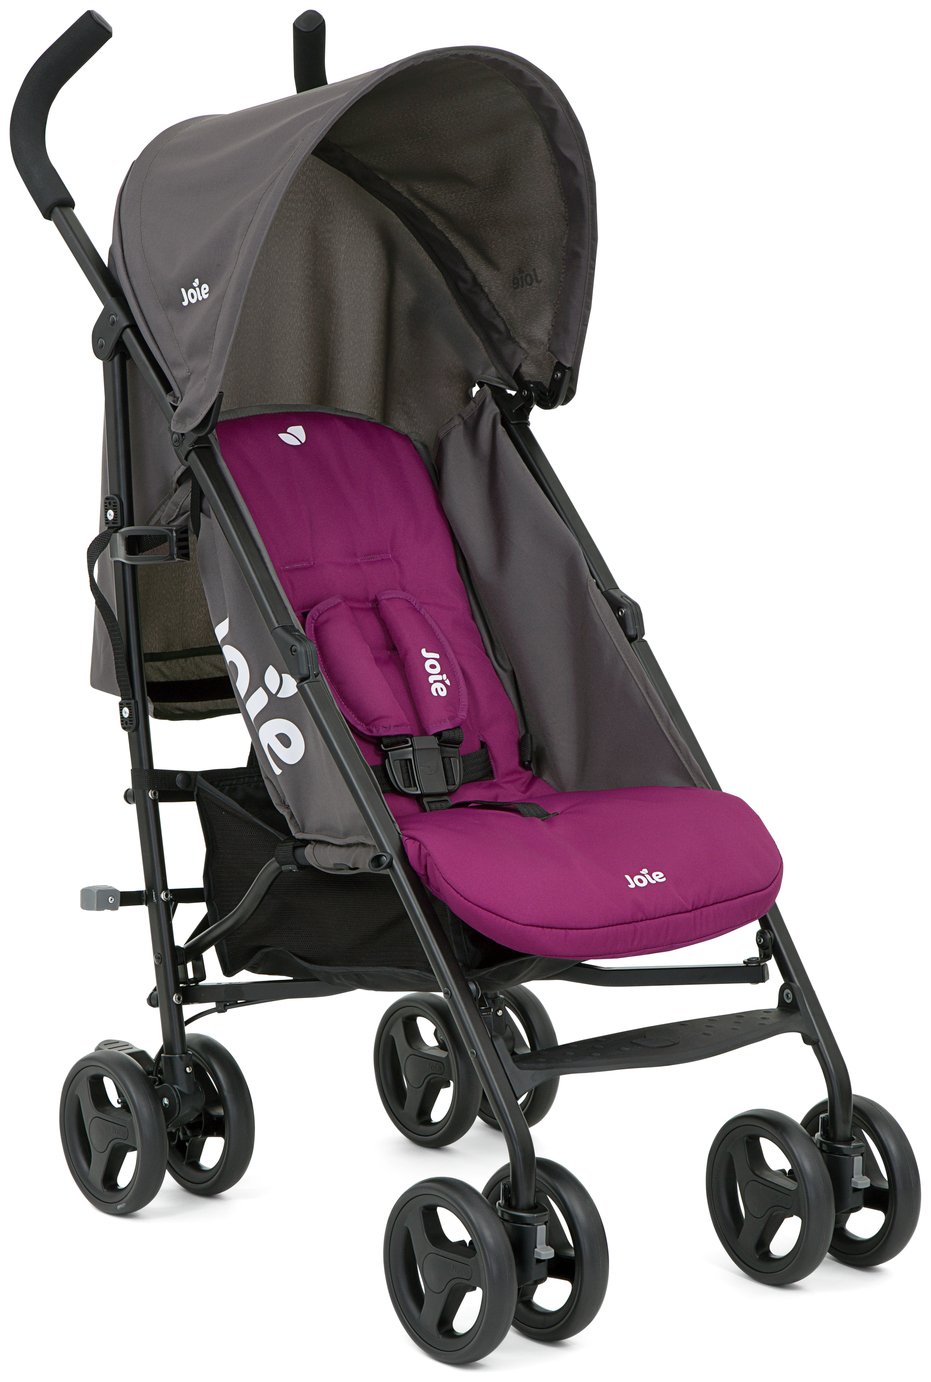 NEW Footmuff CosyToes Compatible with Joie Nitro Stroller LX Pushchair 12 Colurs 